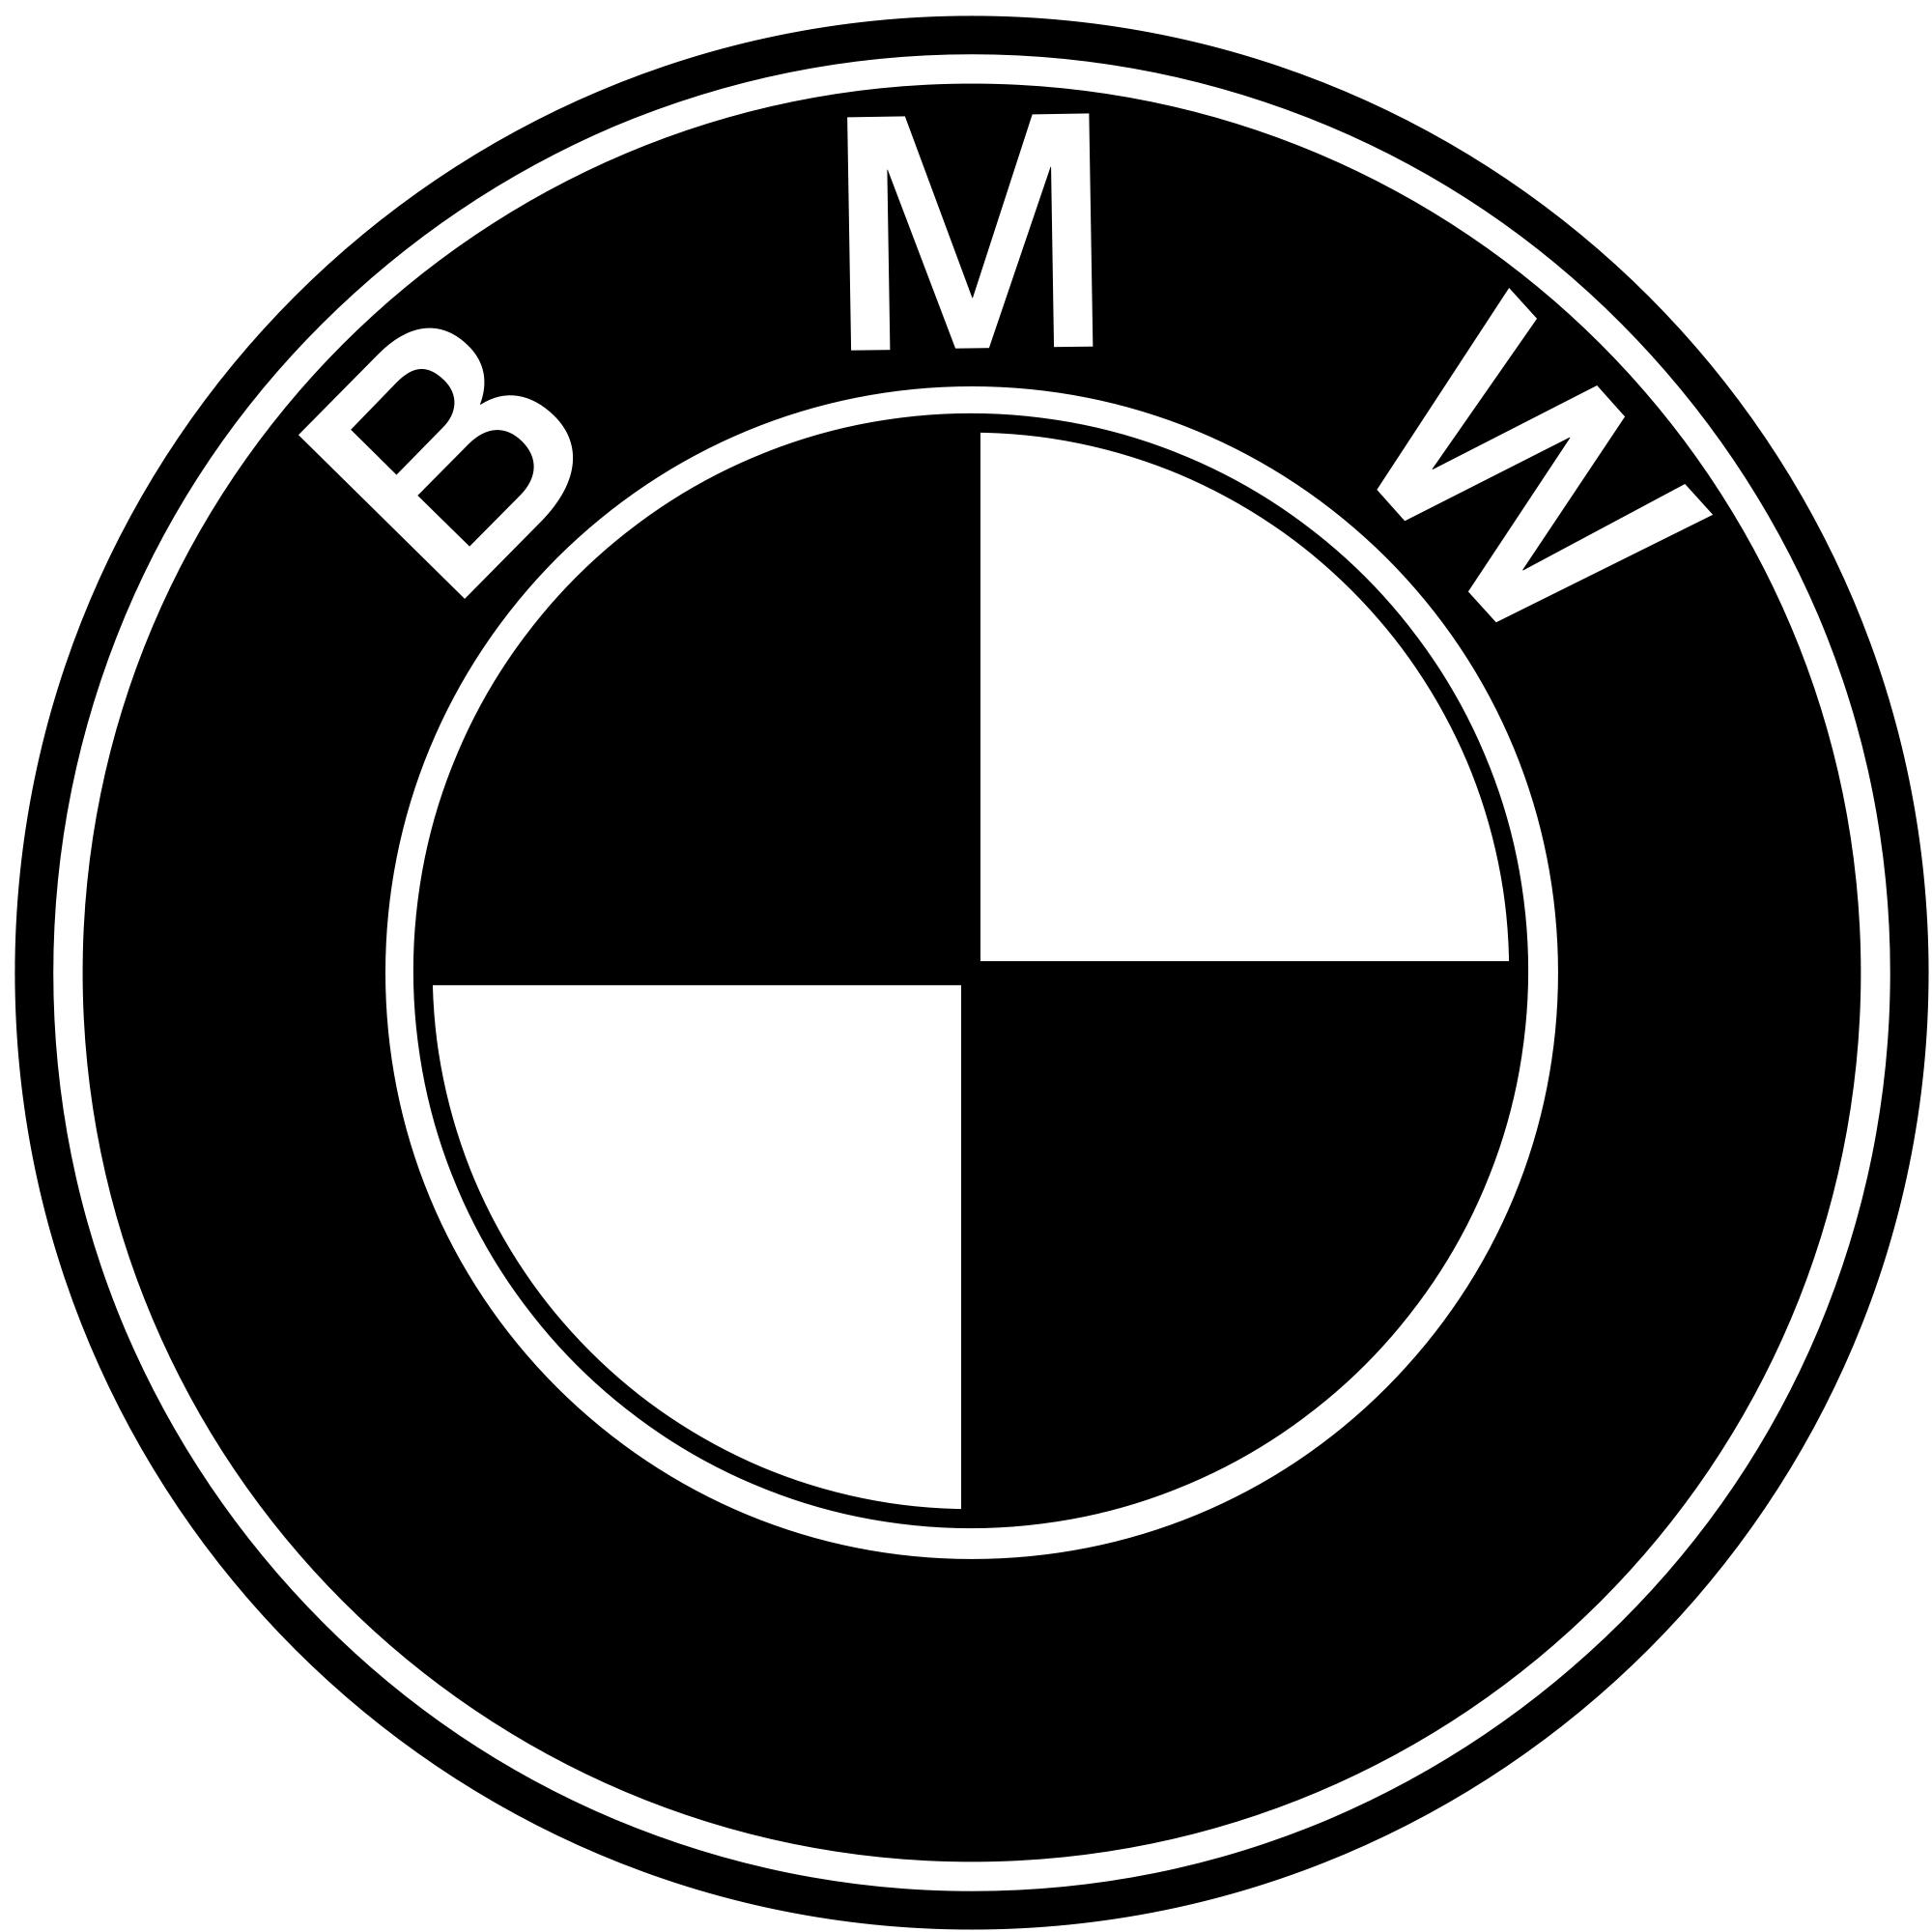 https://www.pngall.com/wp-content/uploads/13/BMW-Logo-PNG-Photo.png